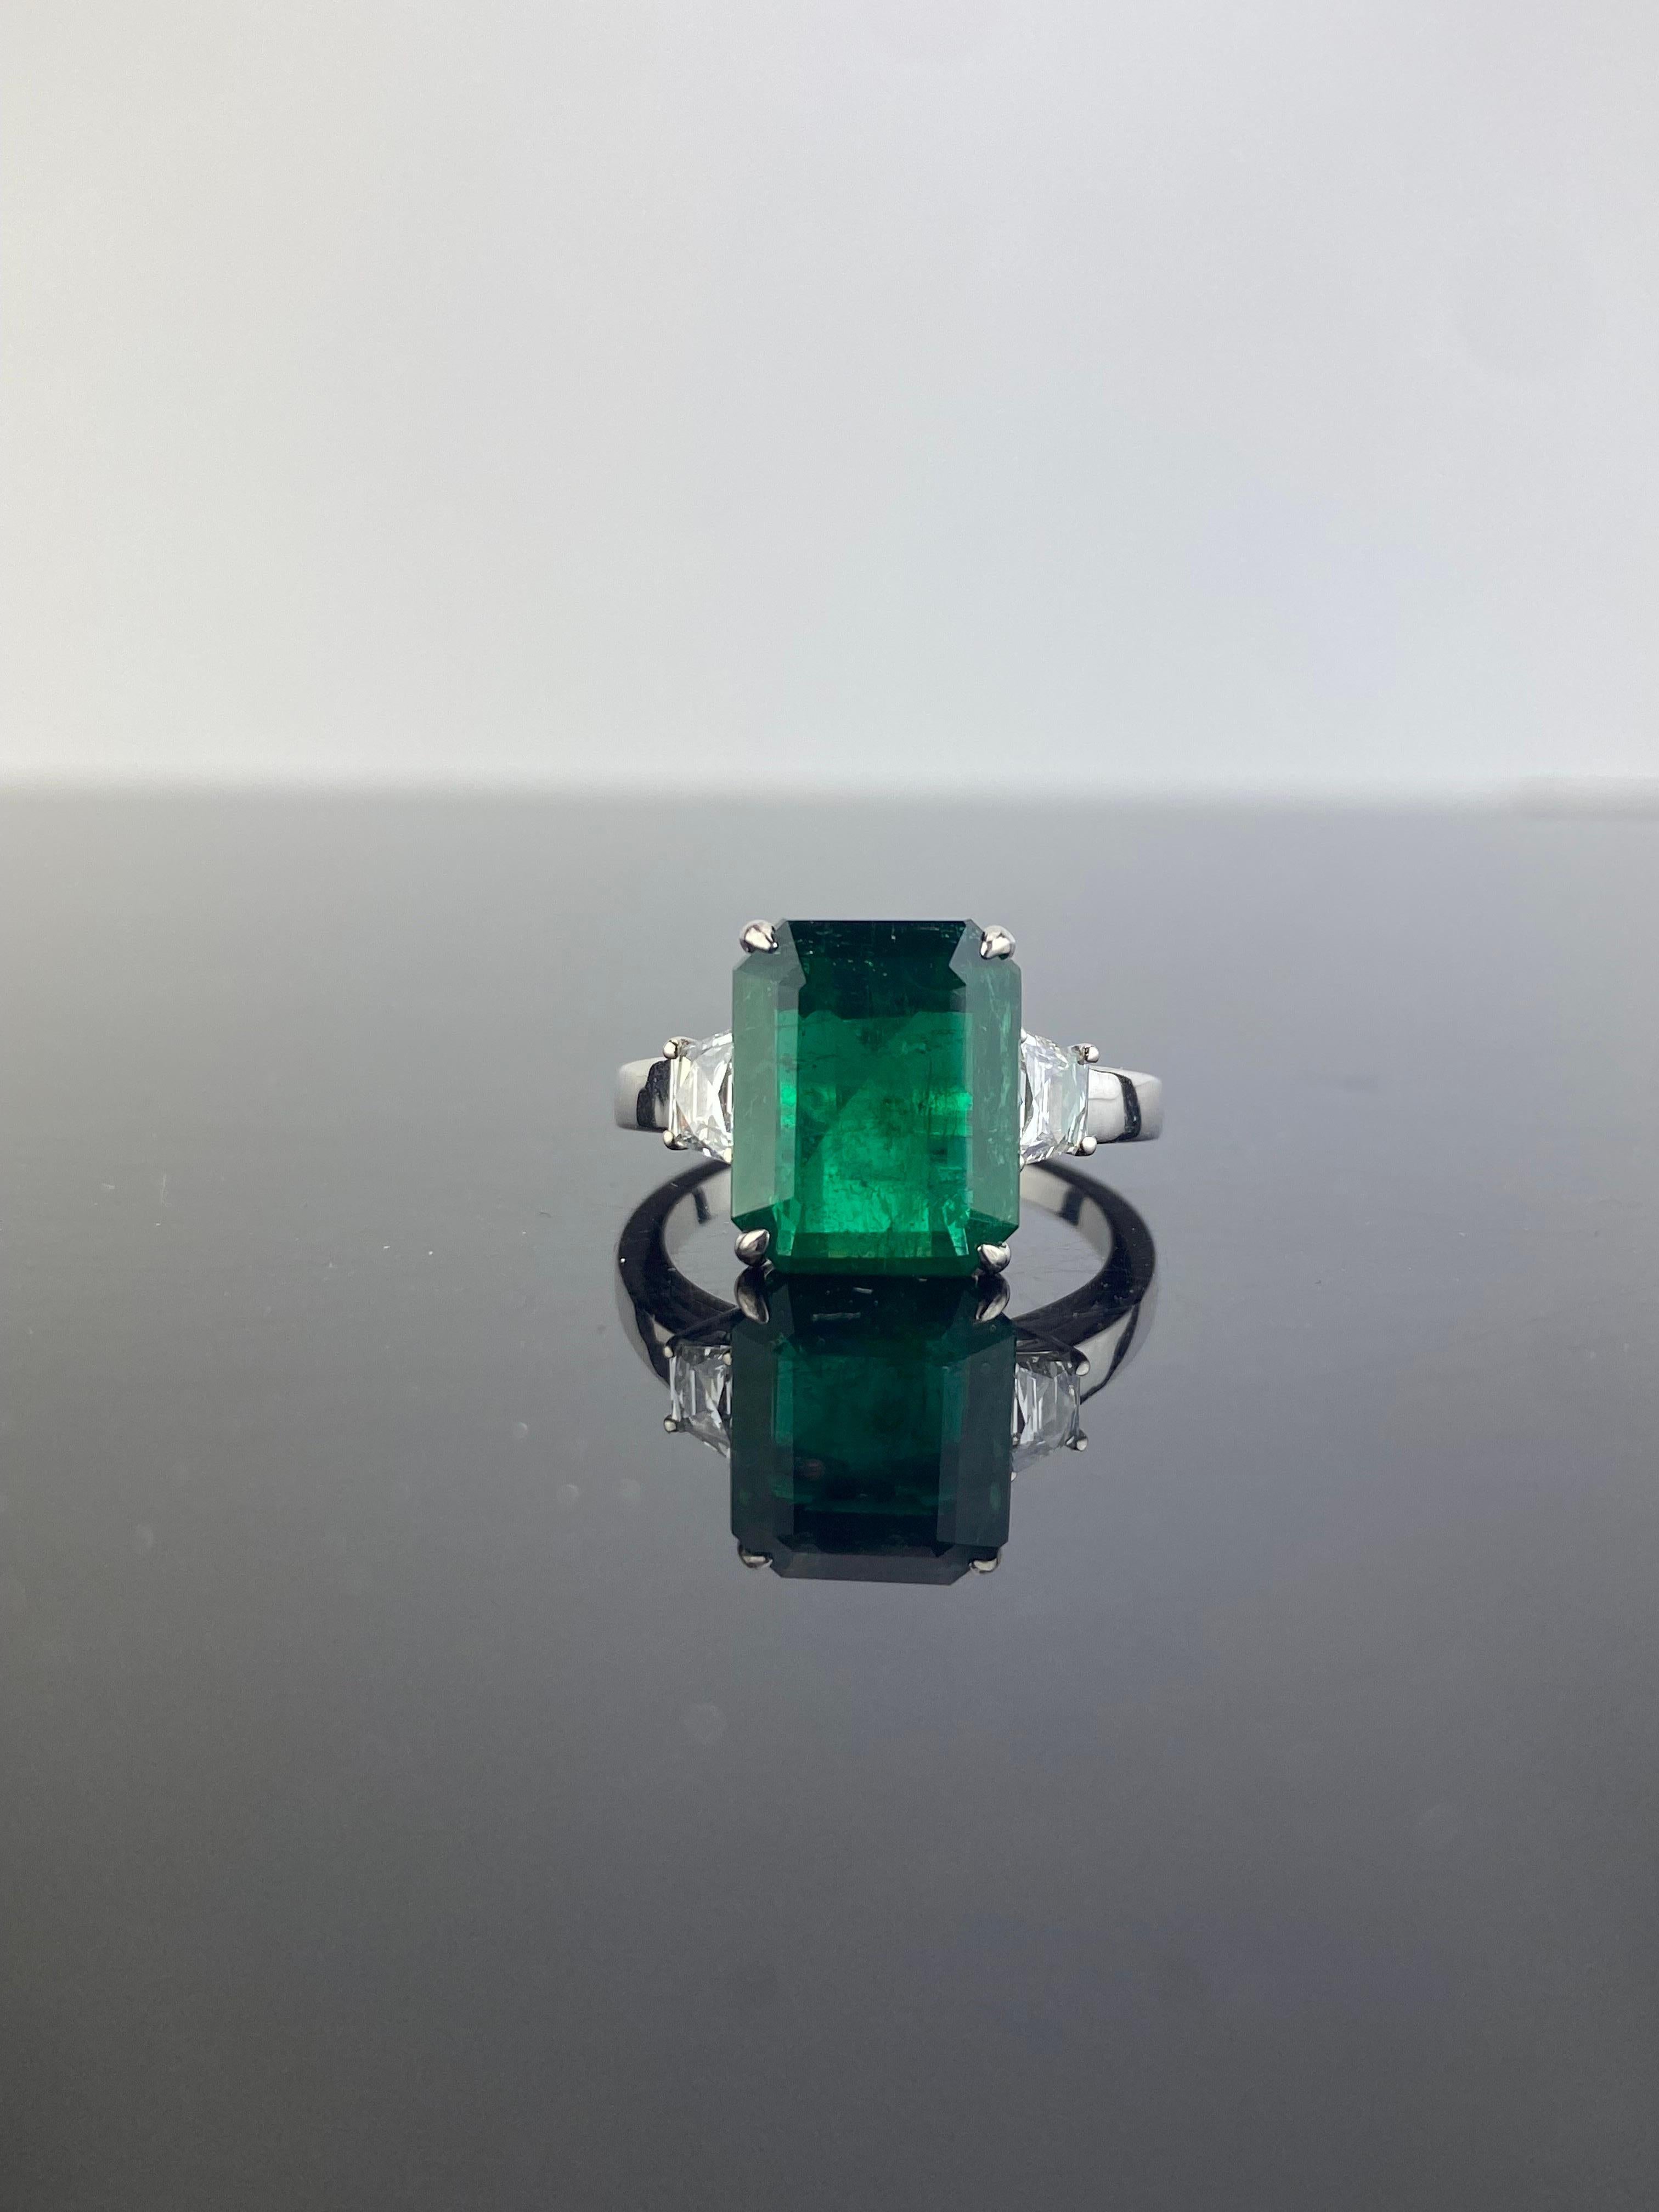 A classic three stone ring, with a 3.90 carat top quality emerald cut Zambian Emerald centre stone and 2 trapeze 0.45 carat side stone White Diamonds. The Emerald is transparent, with an ideal vivid green color and great luster. The ring is